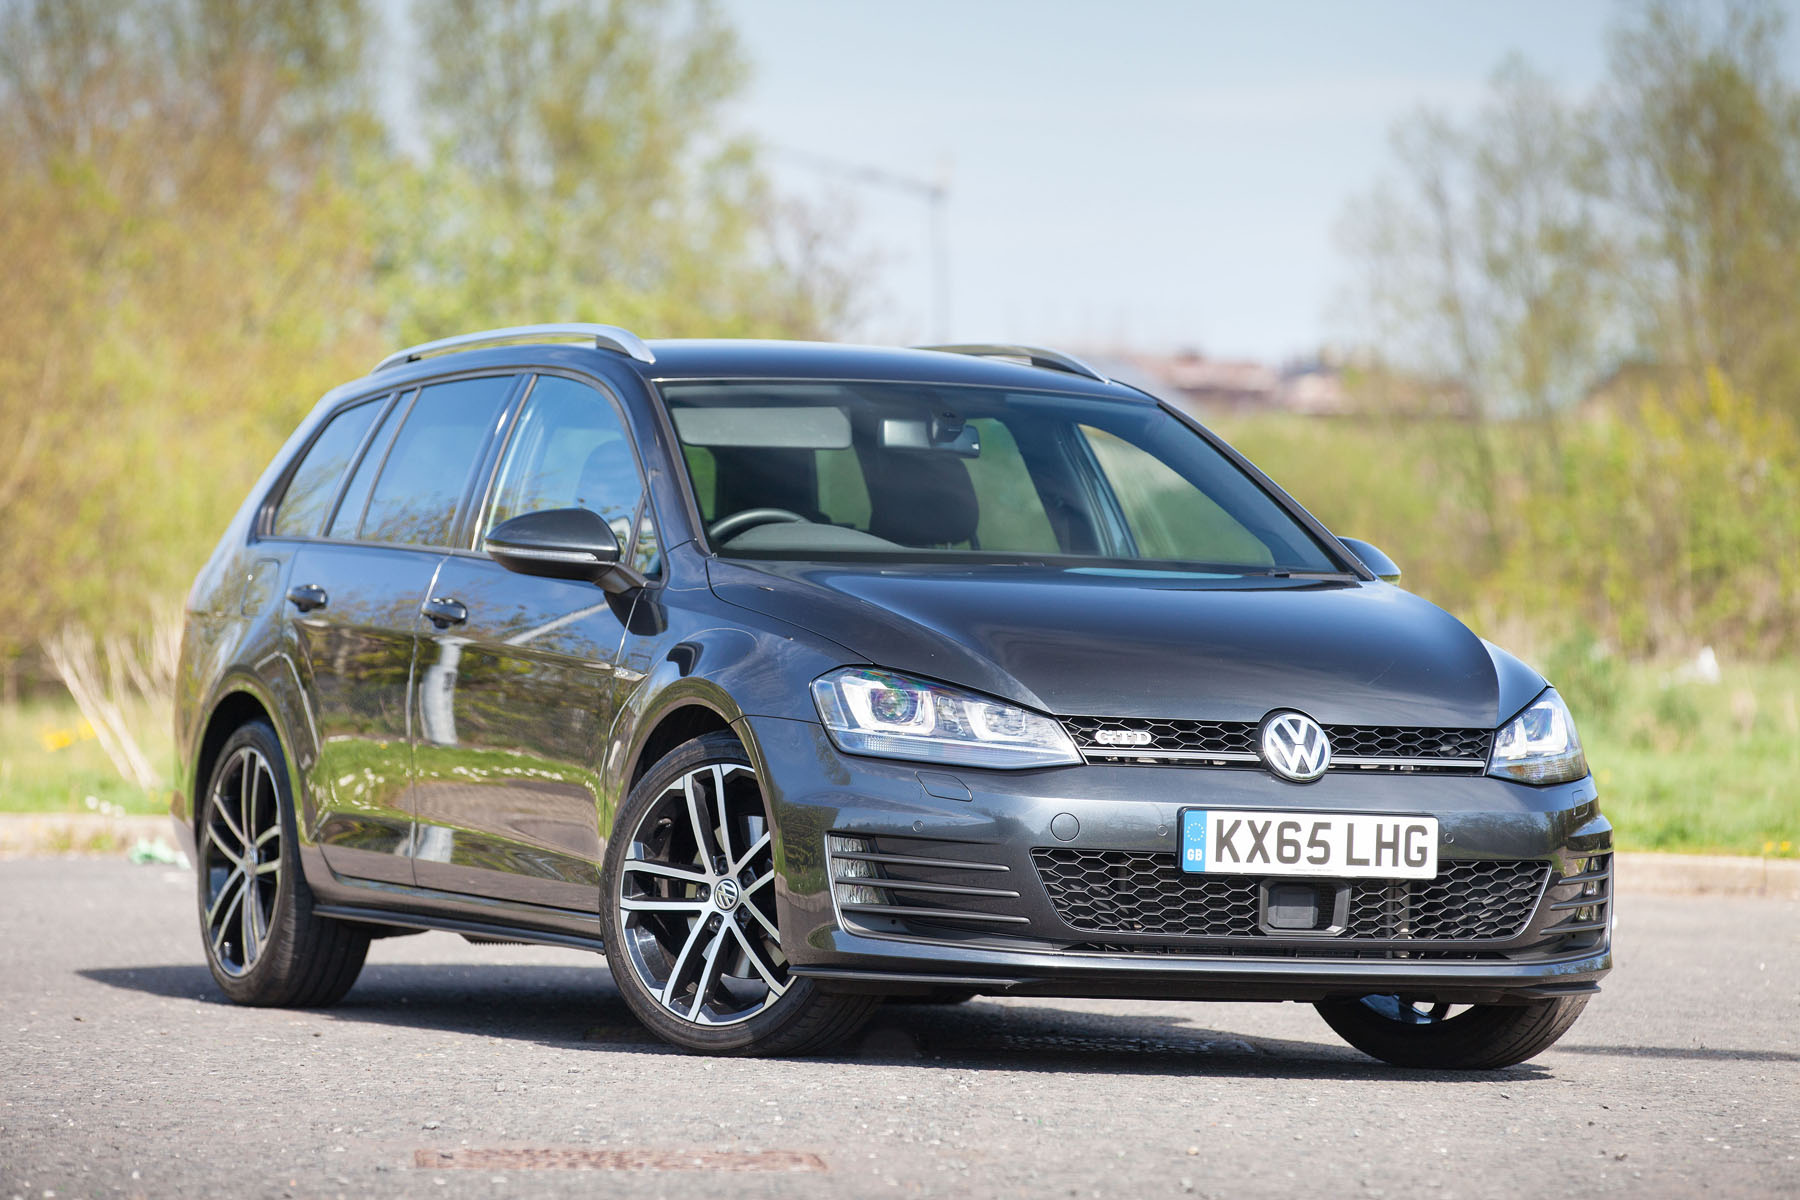 Volkswagen Golf GTD Estate, car review: Practicality allied with